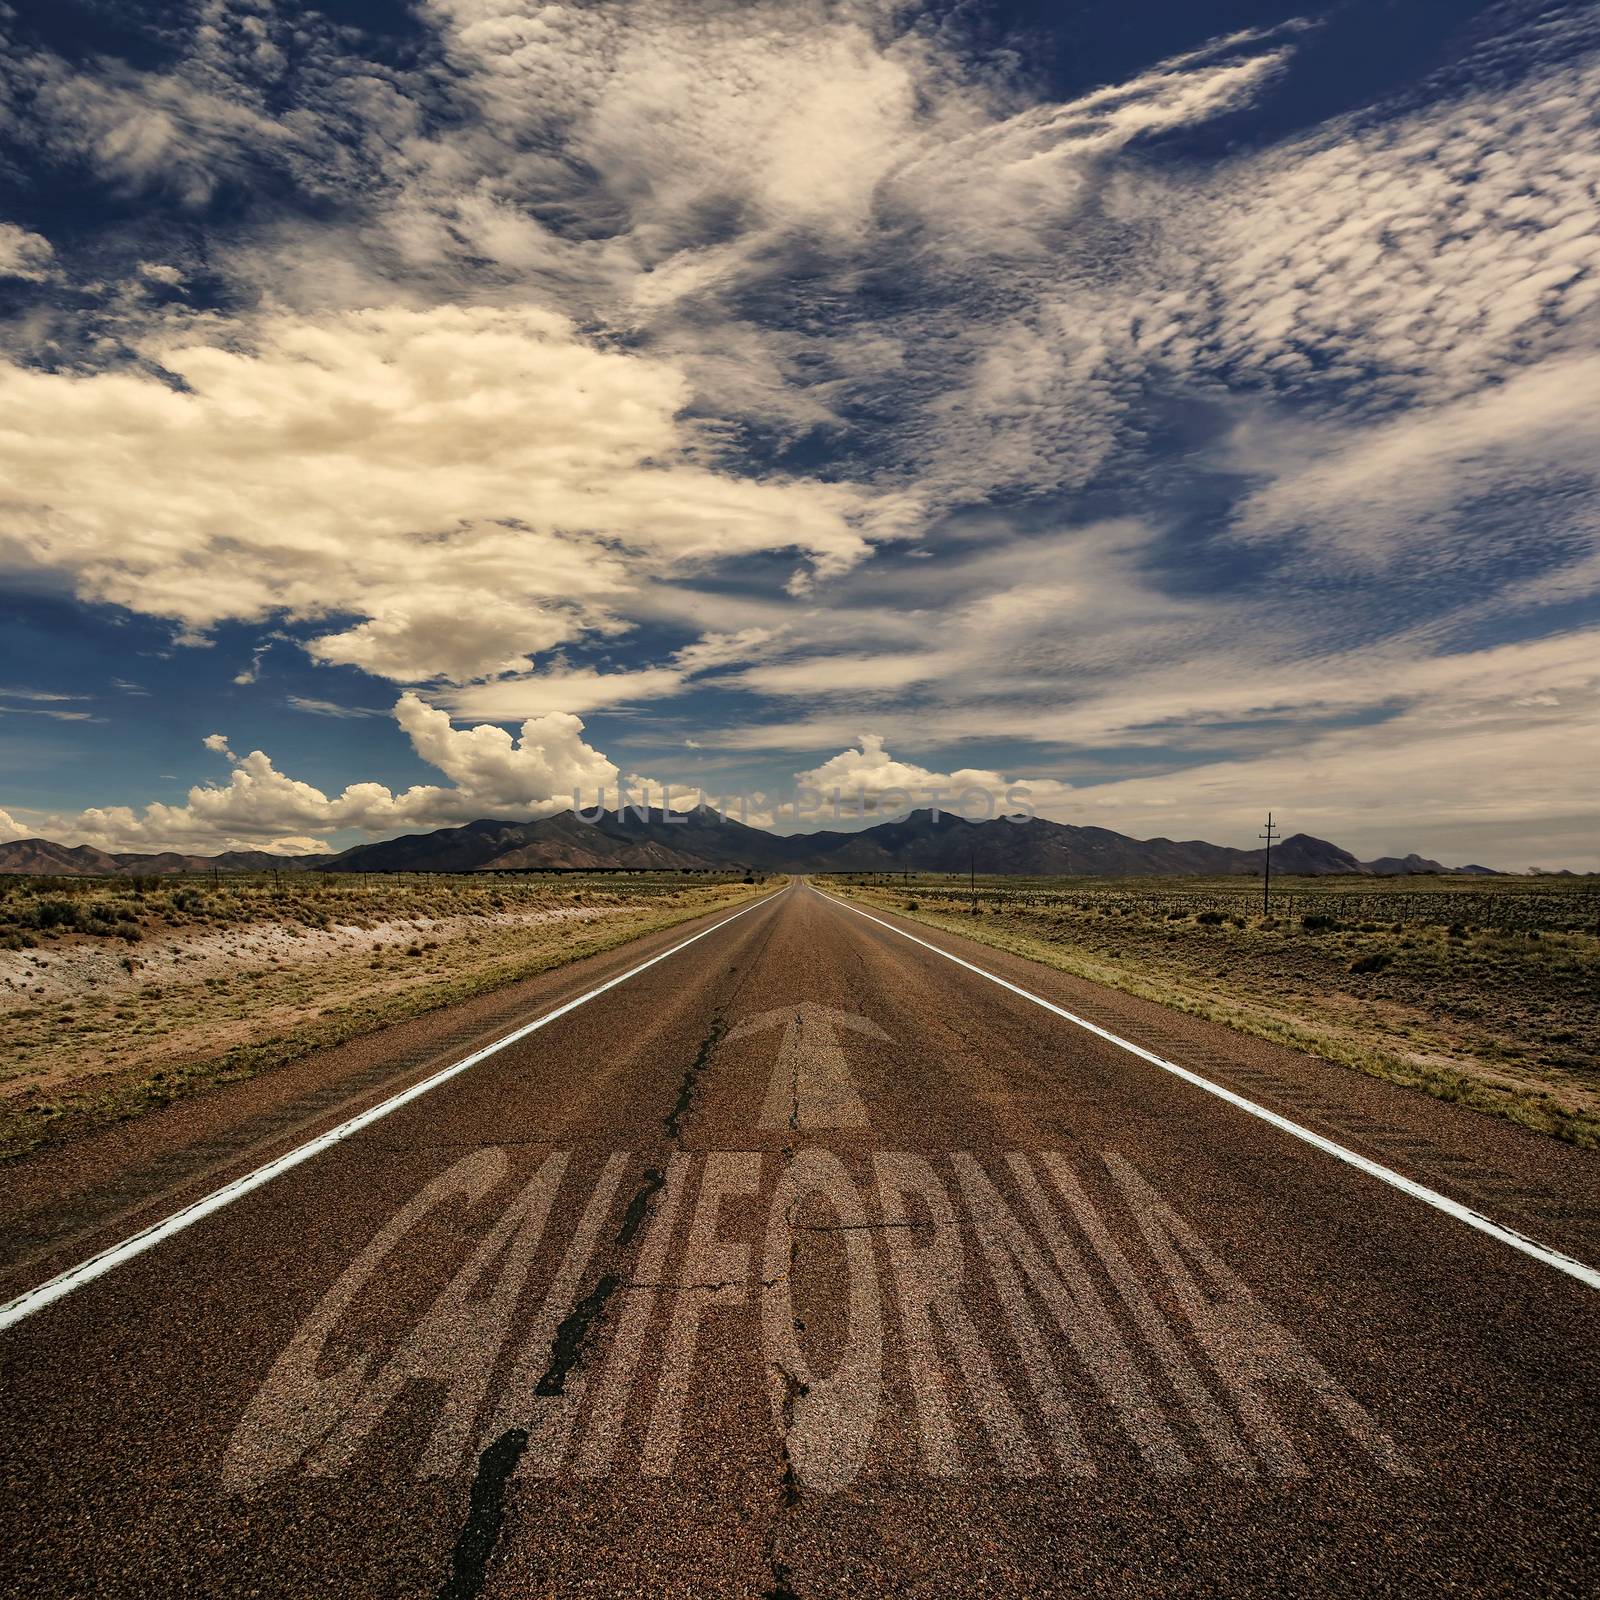 Conceptual image of desert road with the word California and arrow